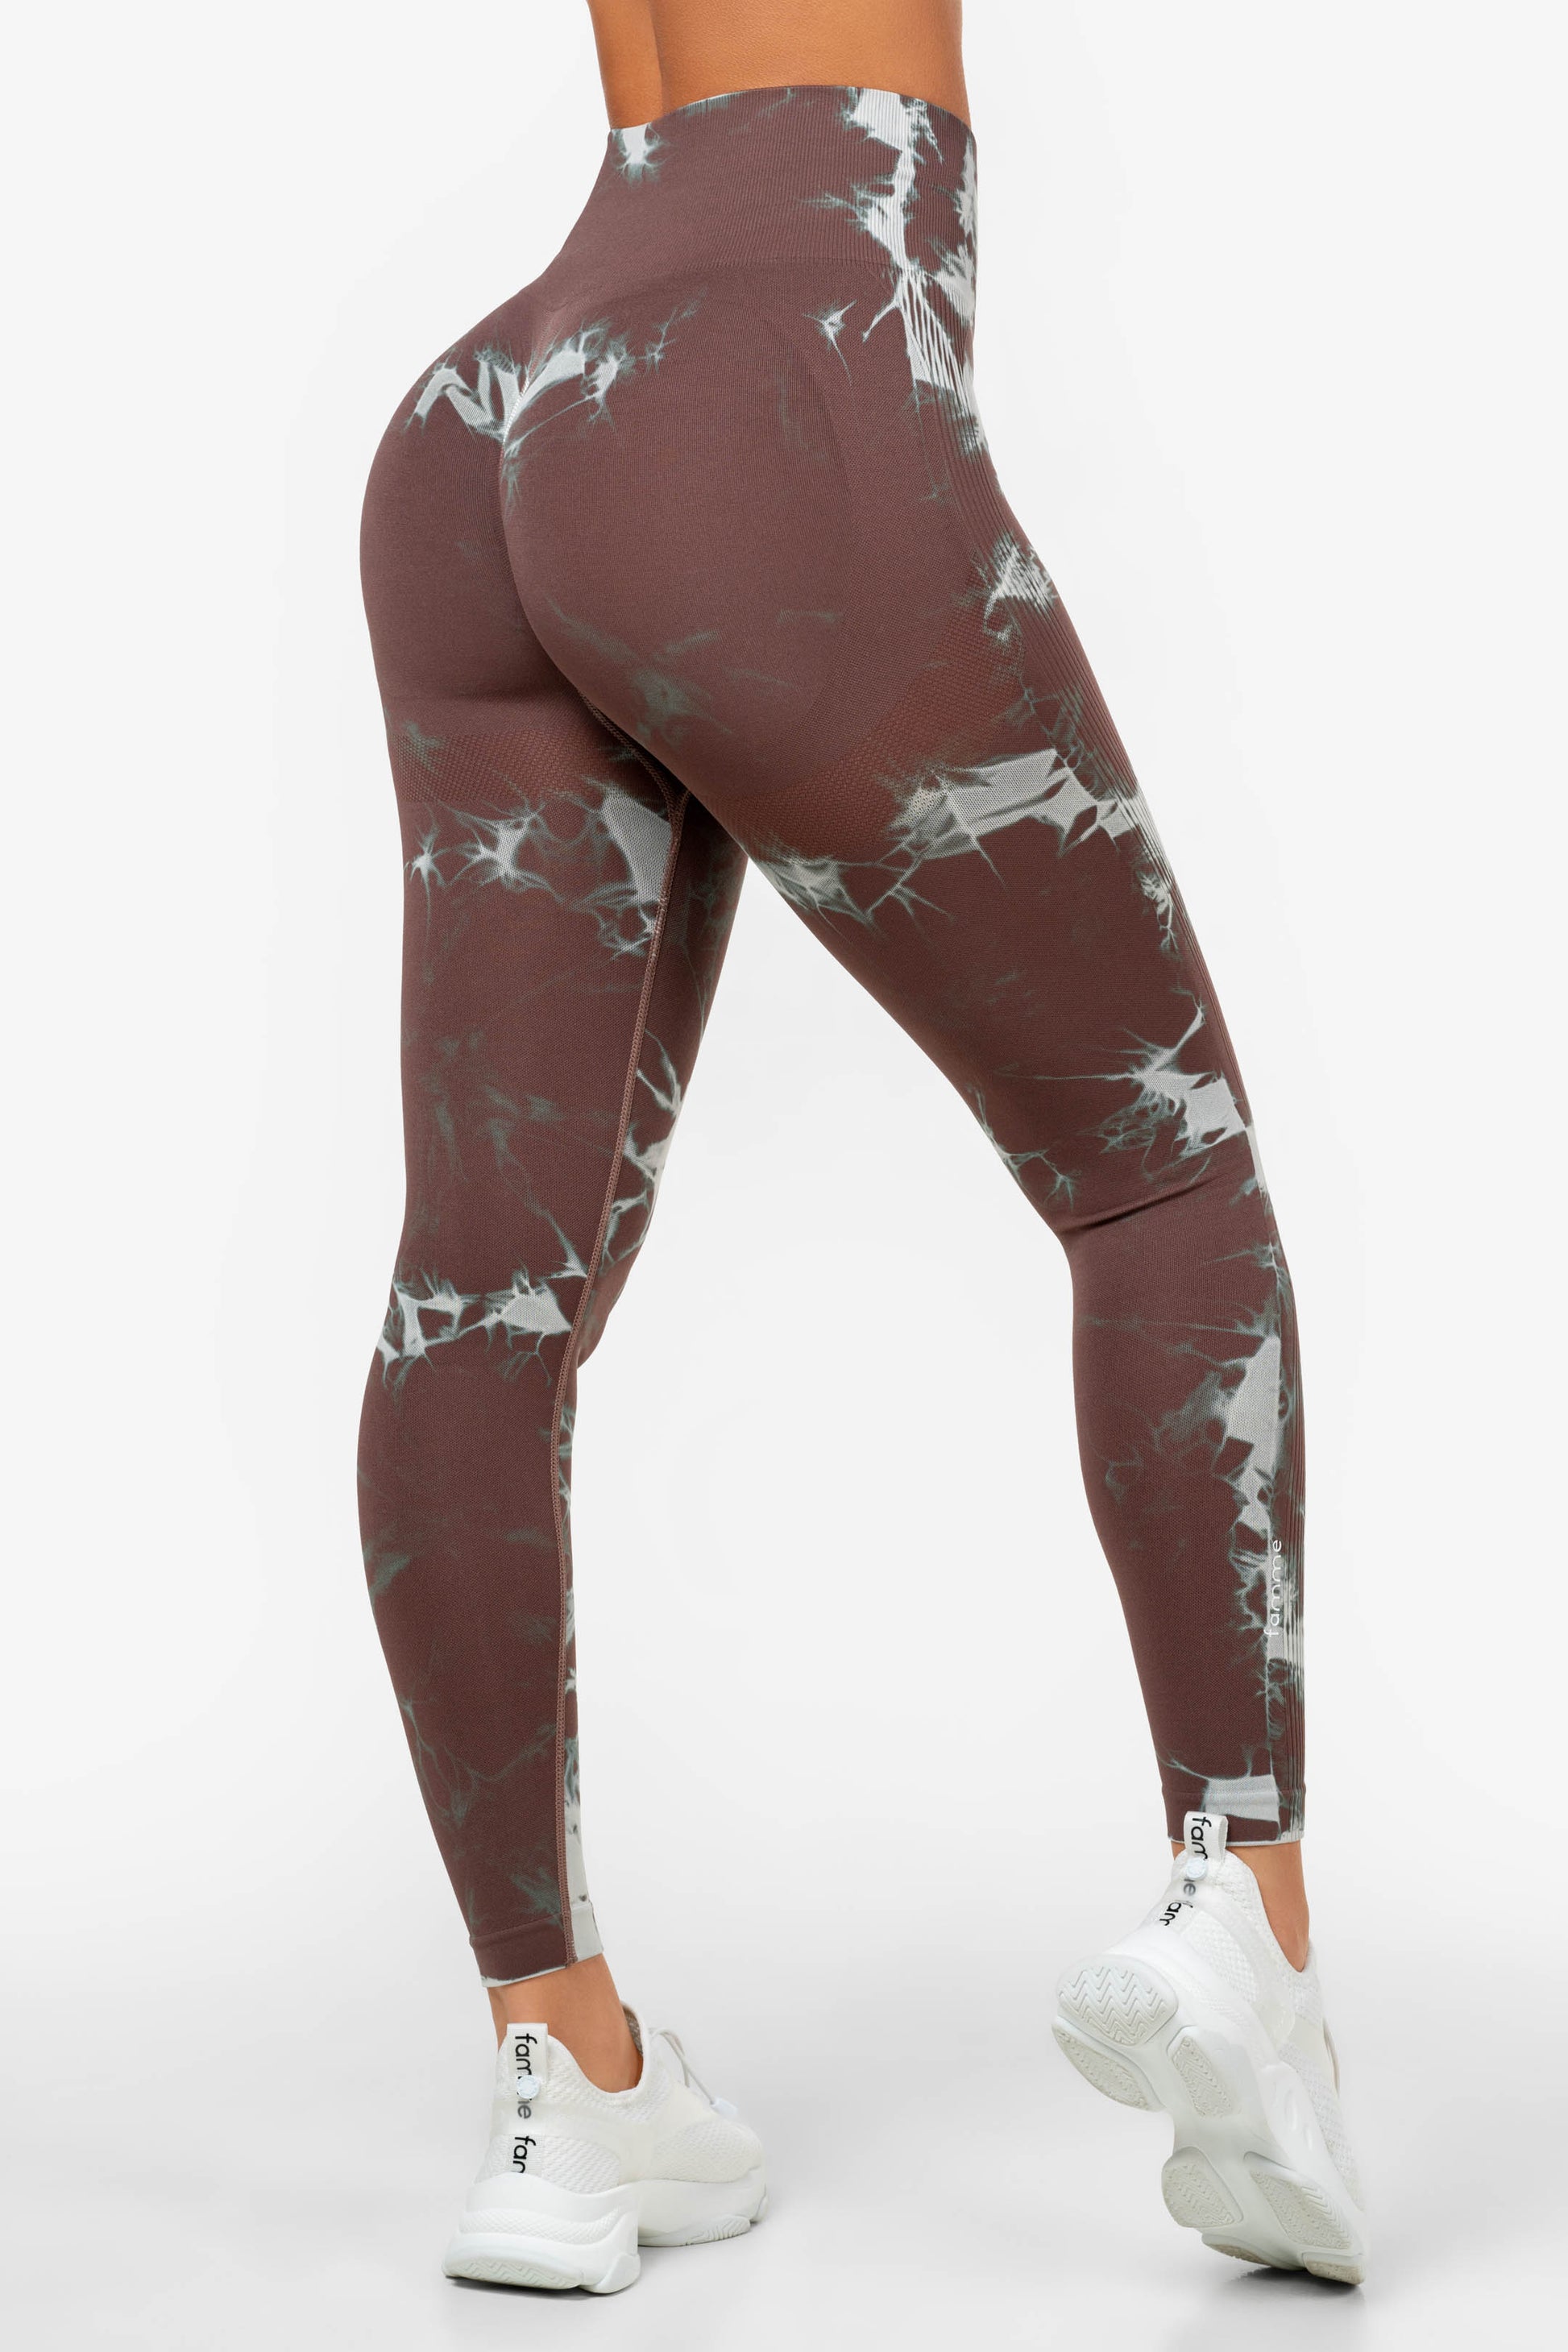 Tie Dye Scrunch Leggings | Seamless tights | Free shipping and returns –  Famme